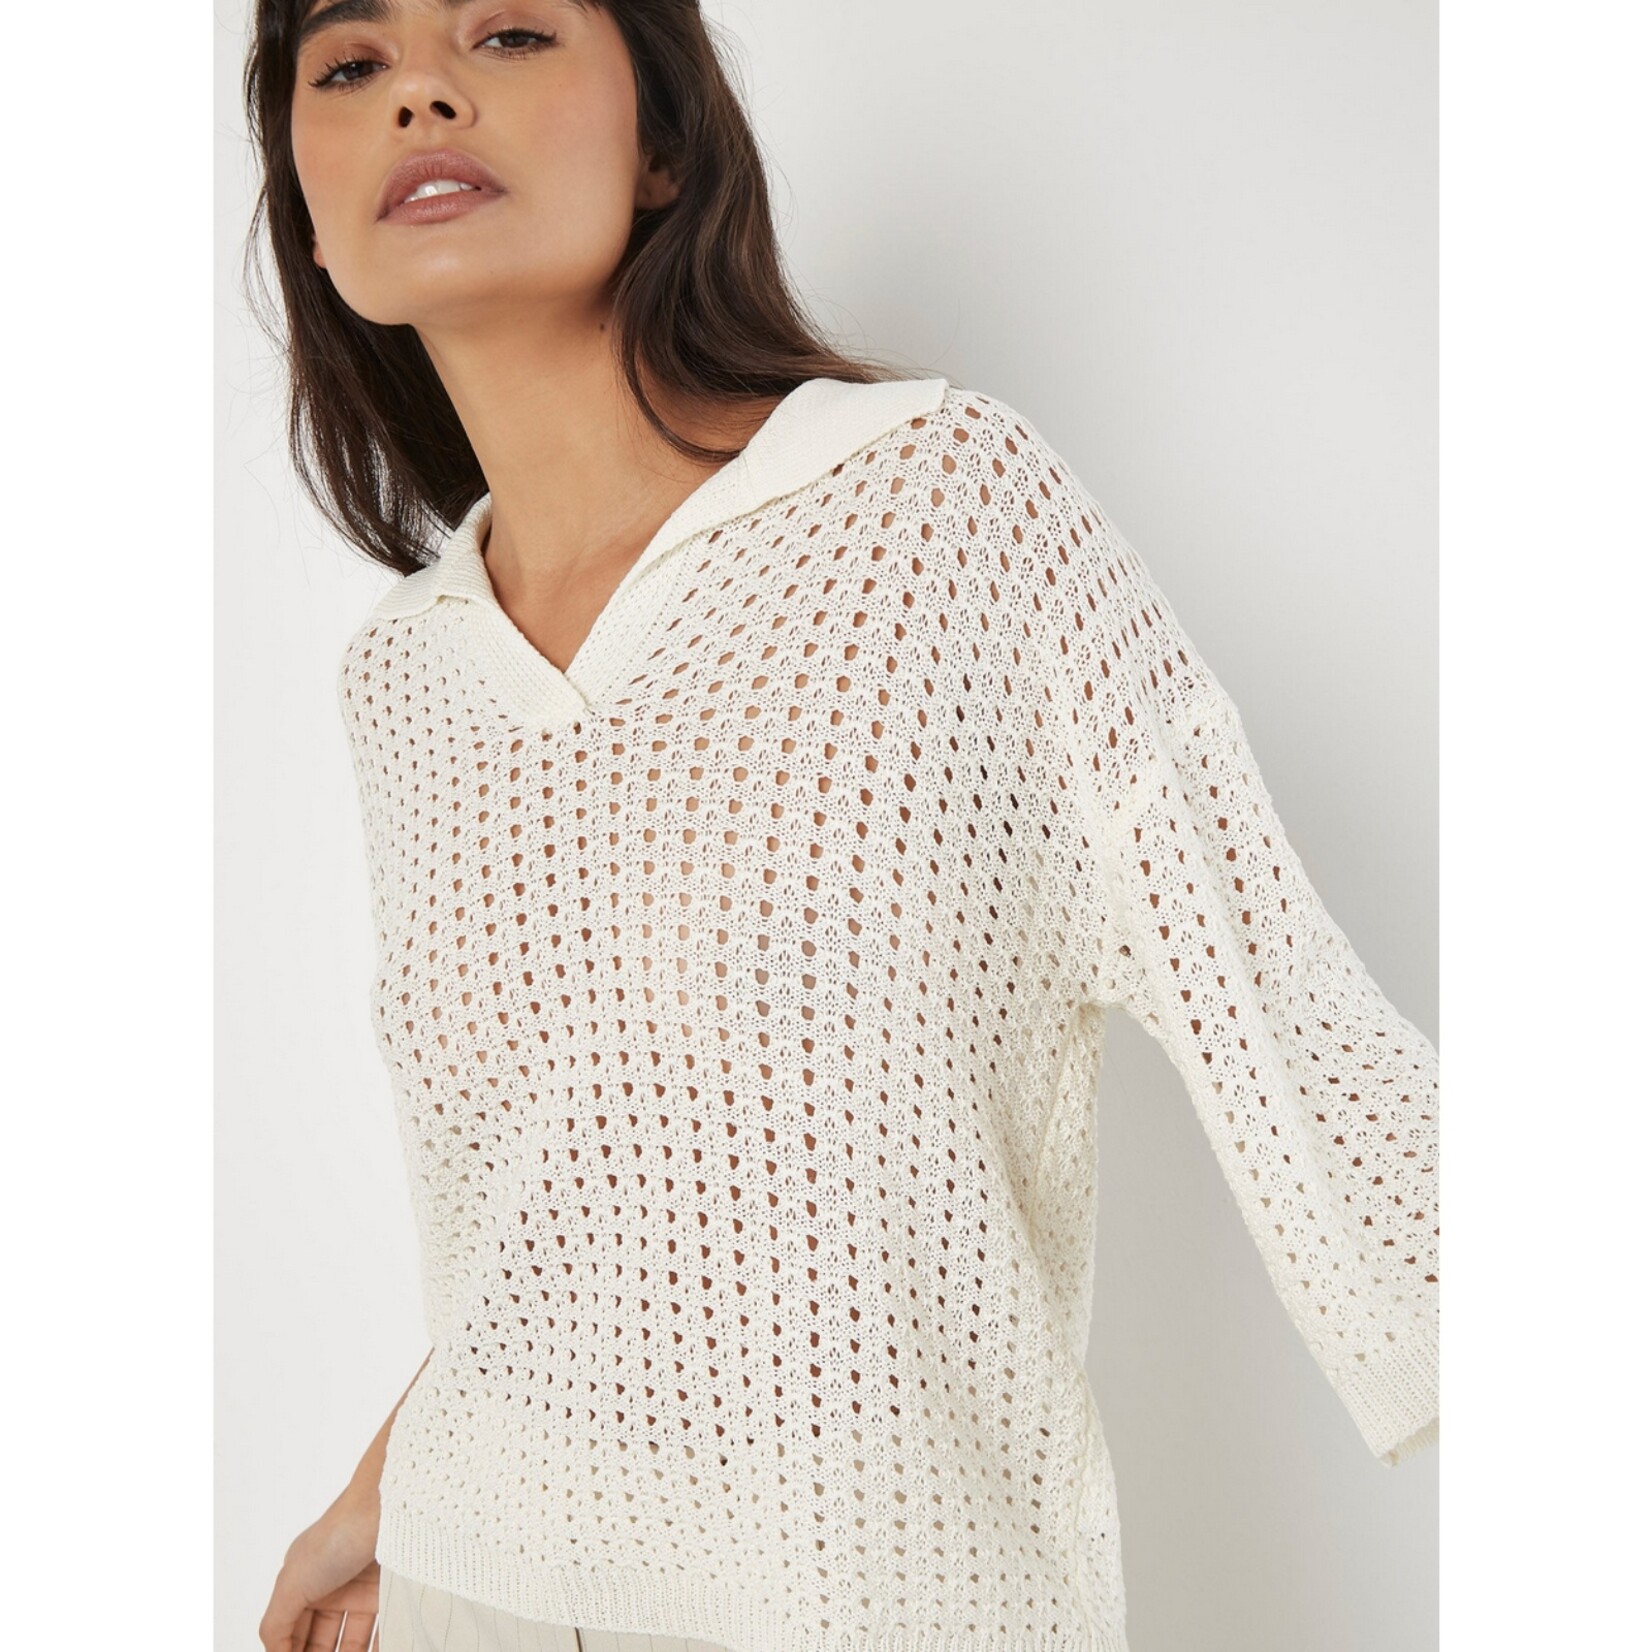 Apricot Asher Open Collar Knit